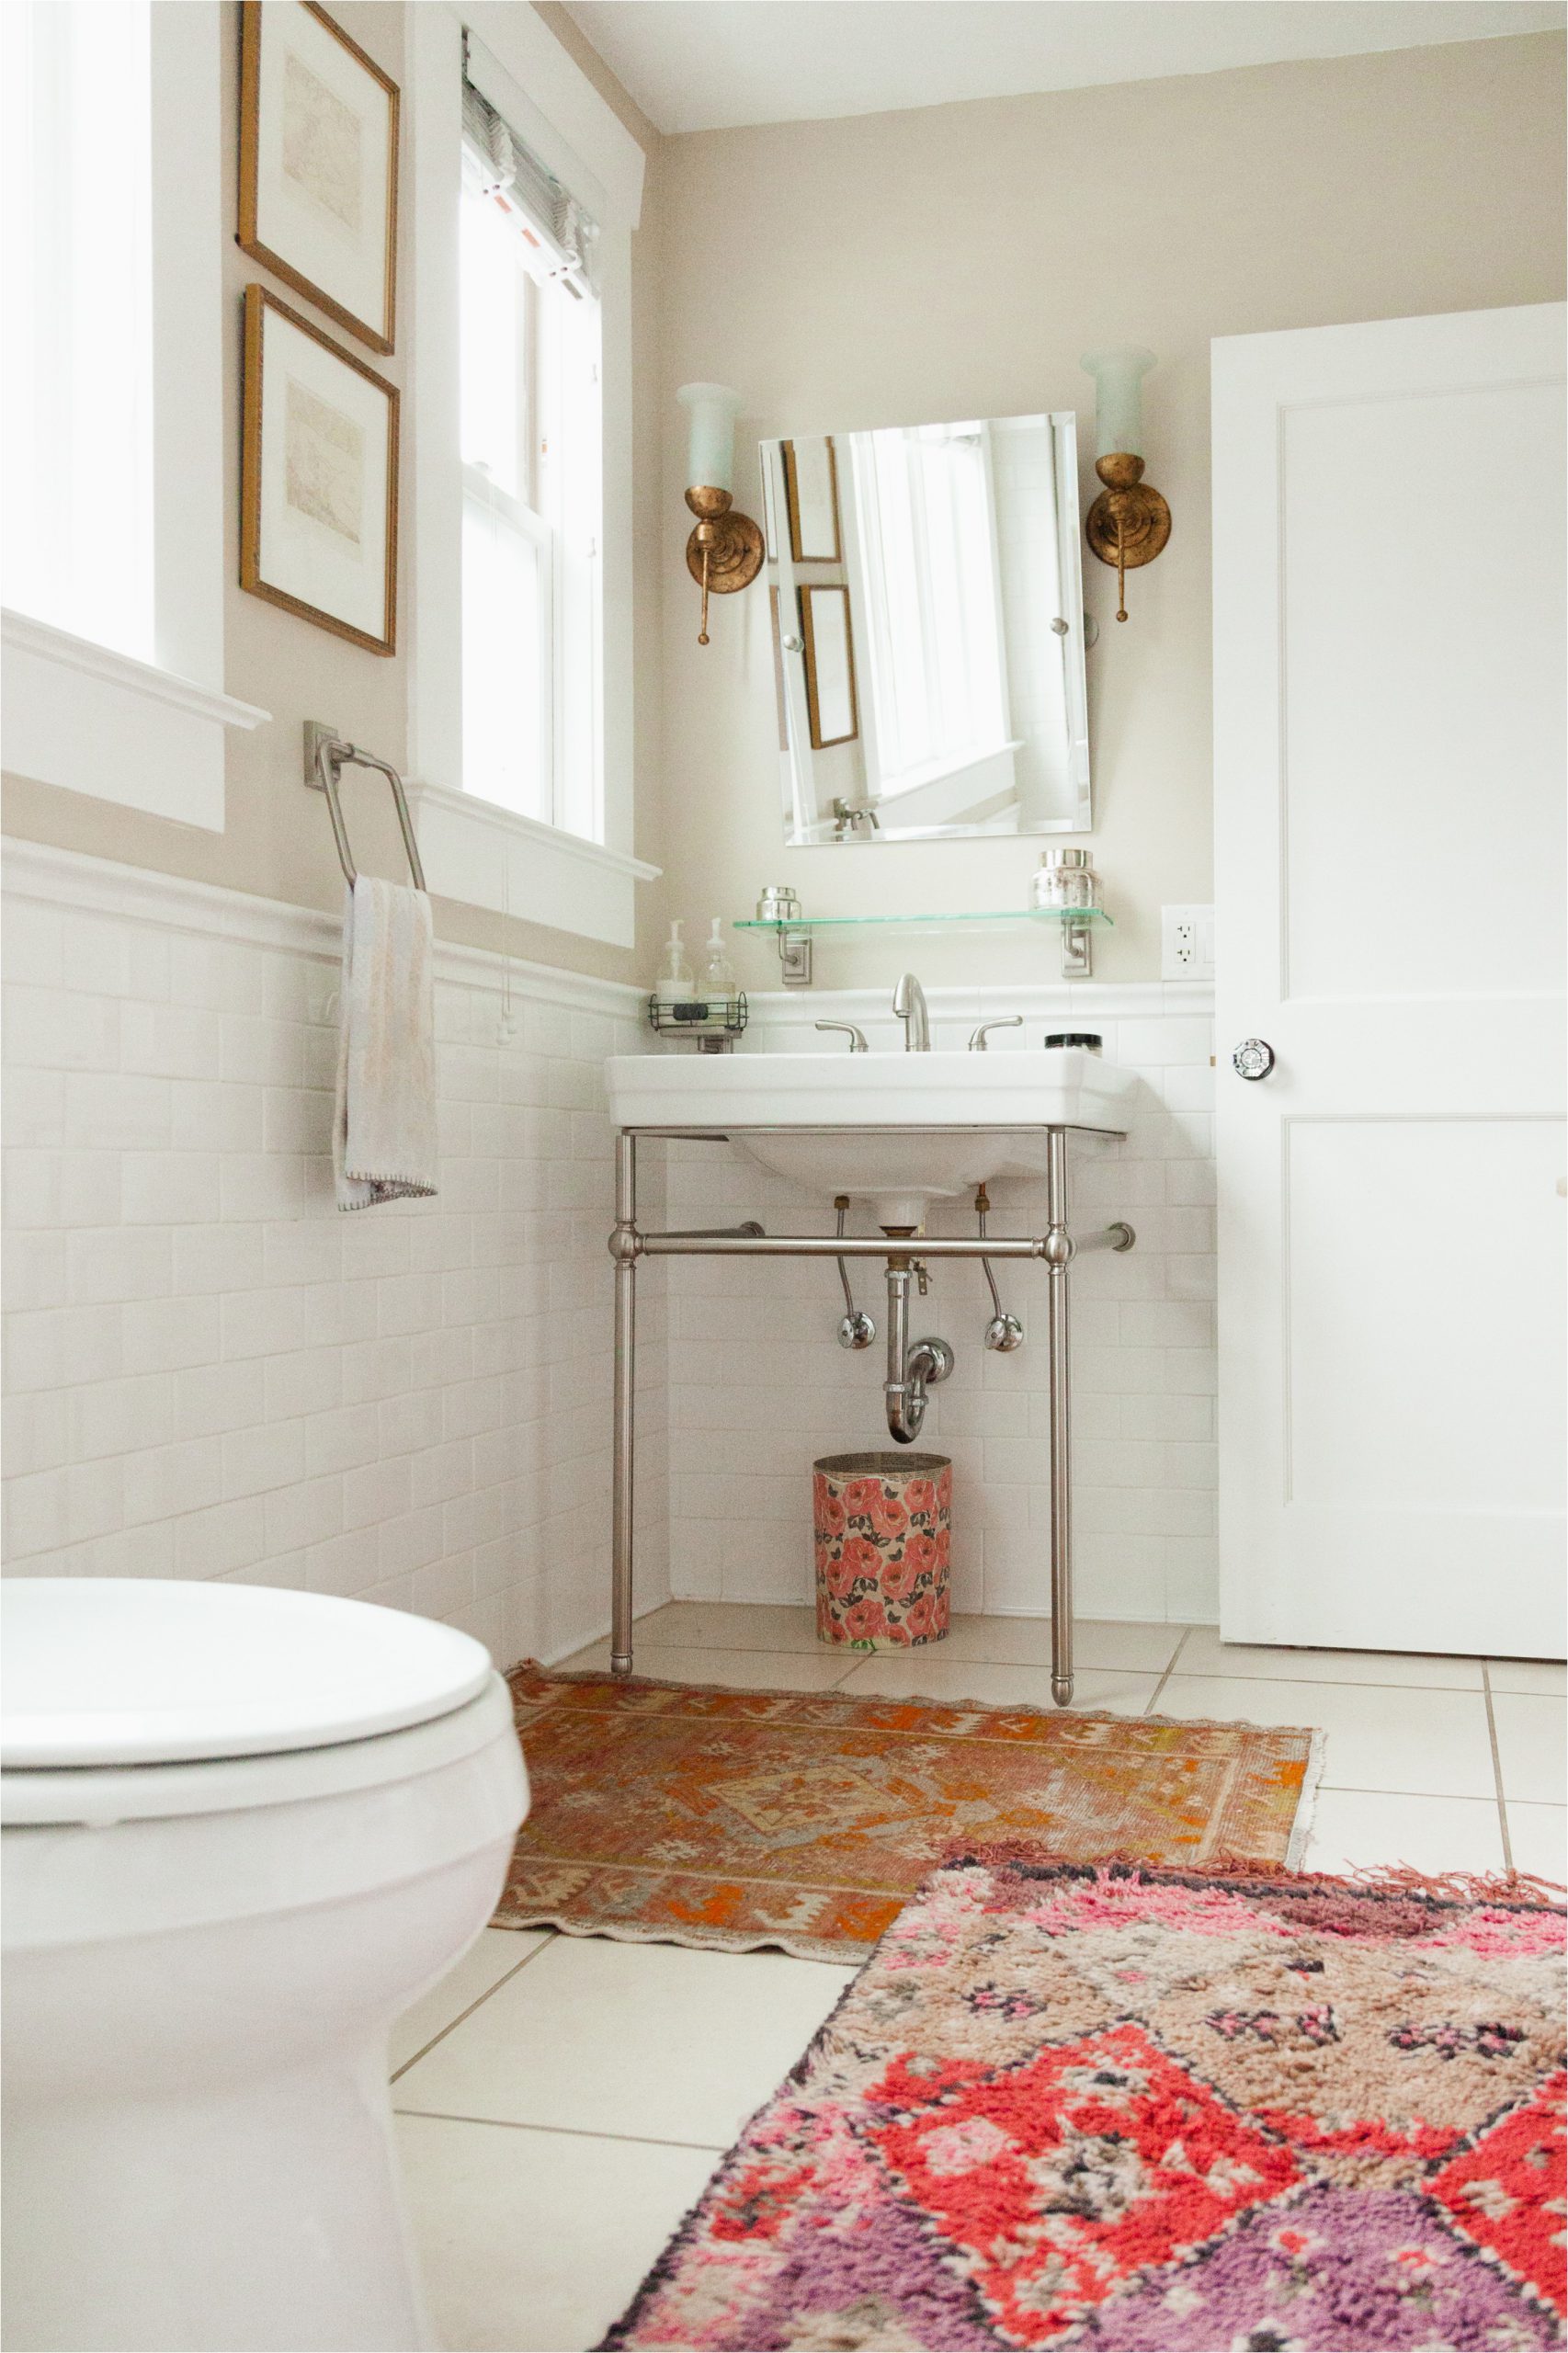 Small Bath Mats and Rugs Look We Love Using Real Rugs In the Bathroom